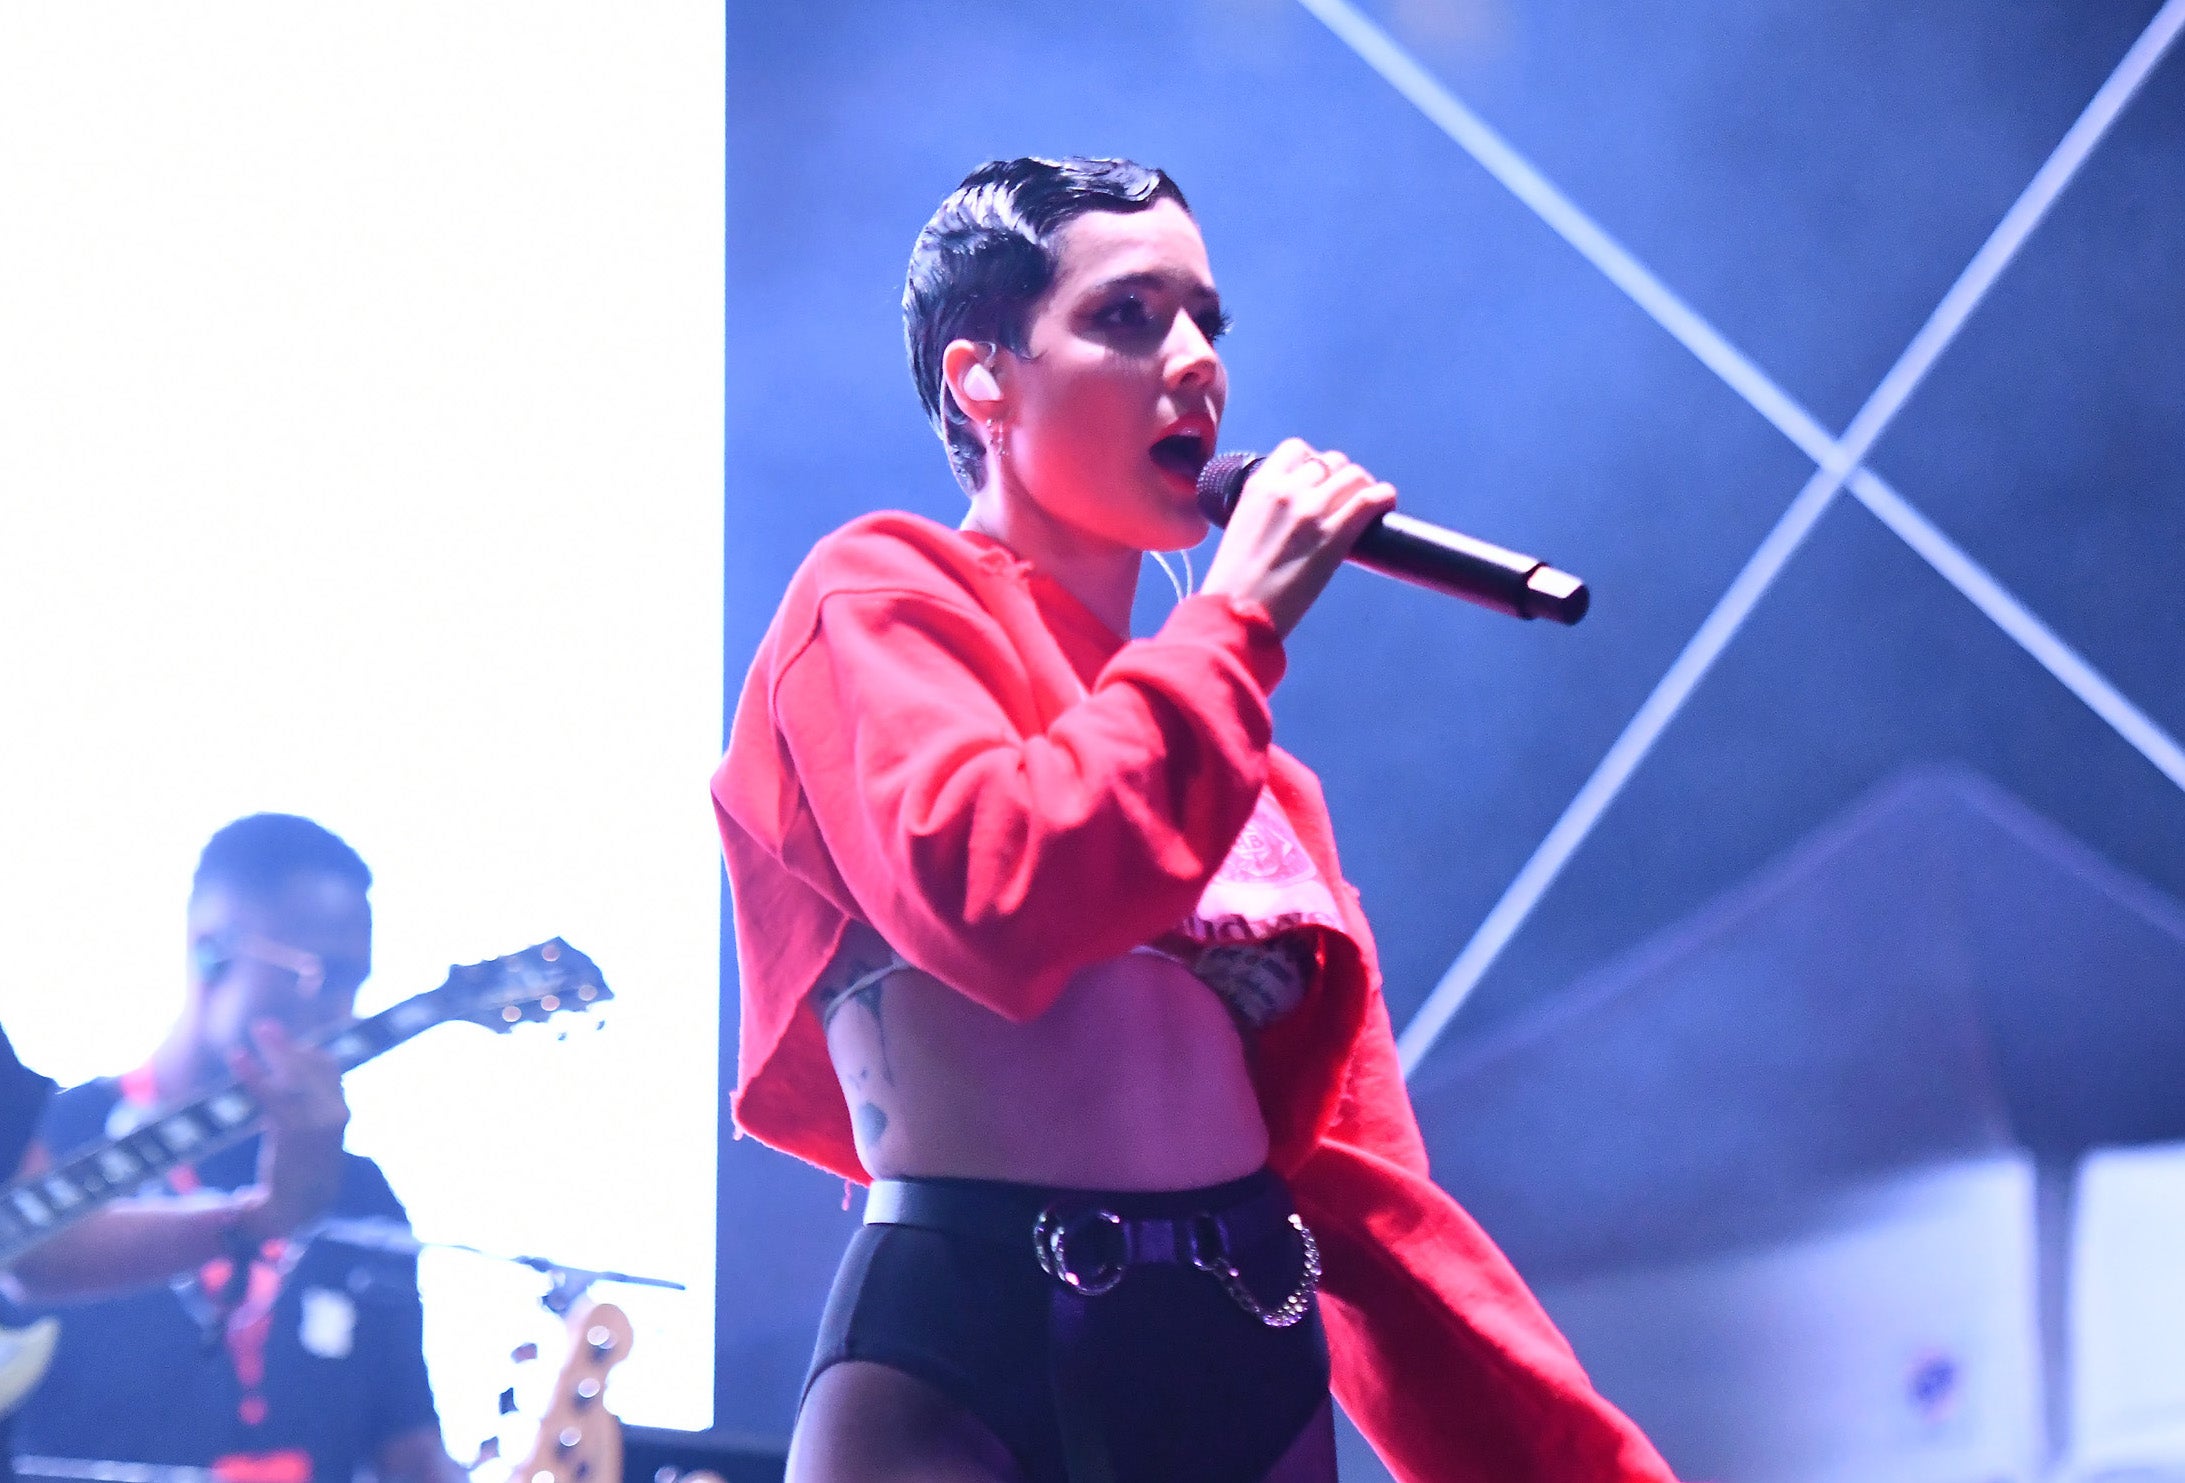 Halsey performs in early 2020